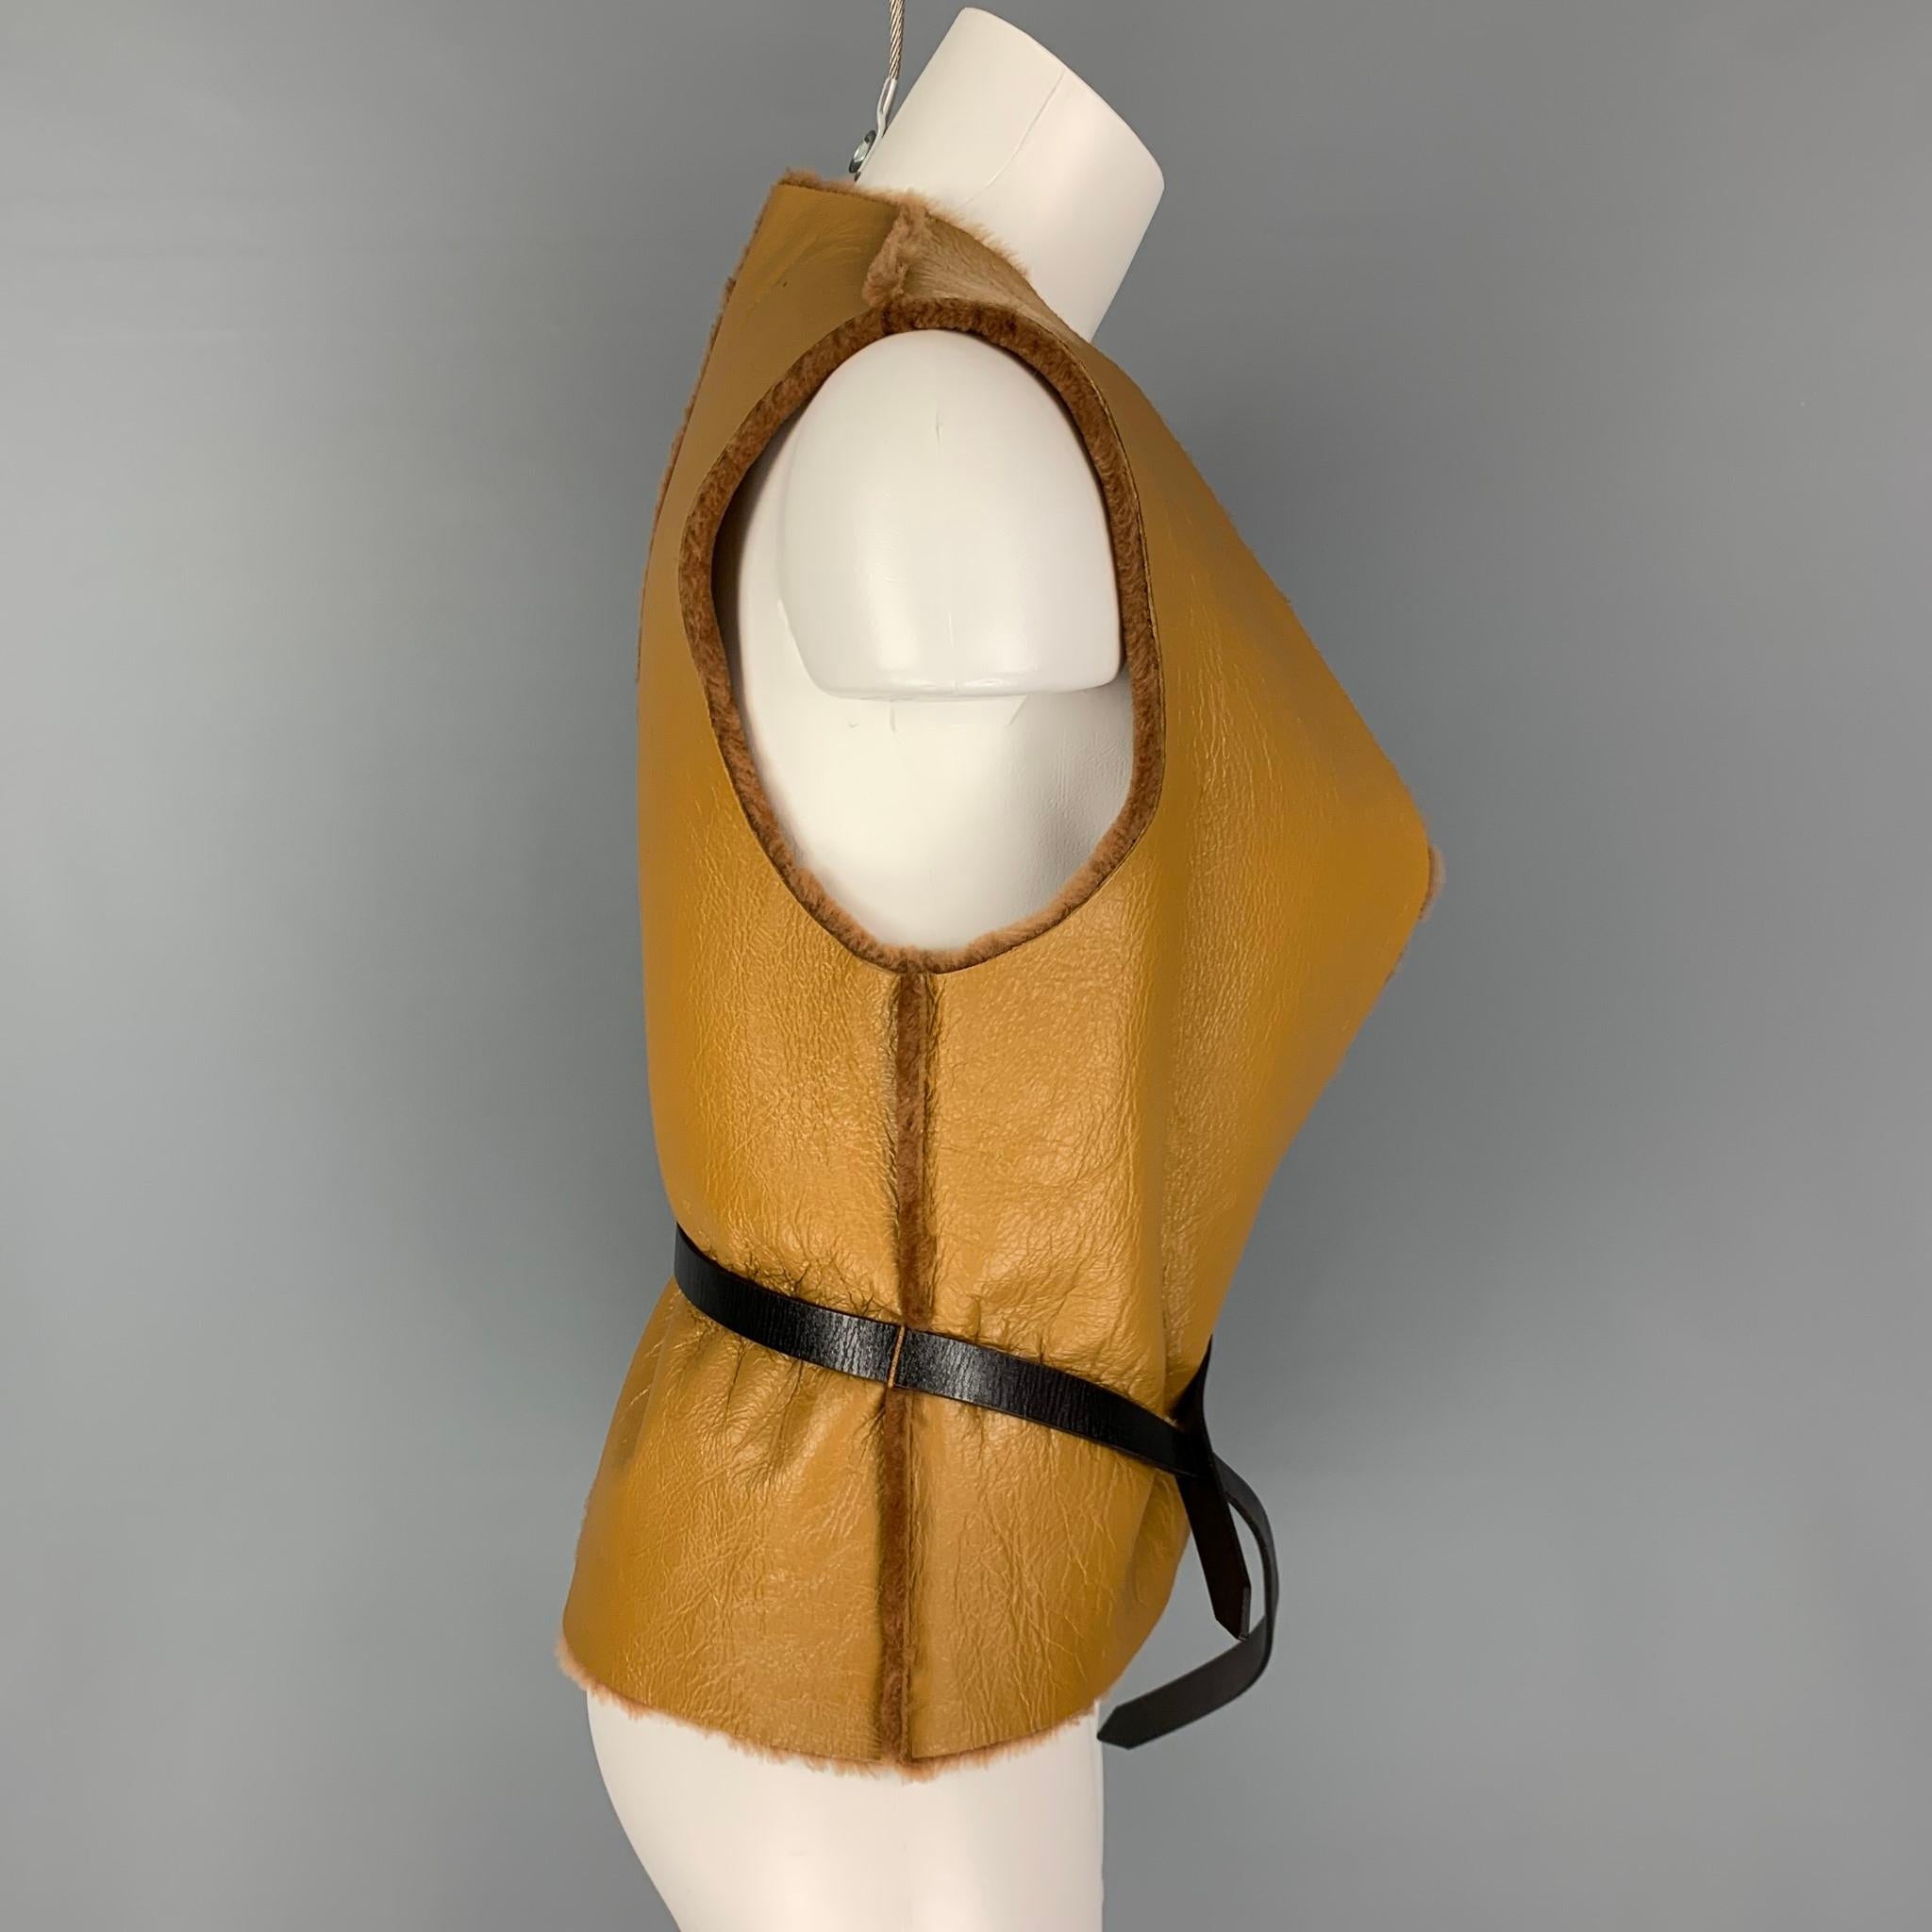 DIEGO BINETTI vest comes in a tan sheep skin leather with a faux fur lining featuring a open front and a belted style. 

New With Tags. 
Marked: M 

Measurements:

Shoulder: 14 in.
Bust: 36 in.
Length: 22.5 in. 